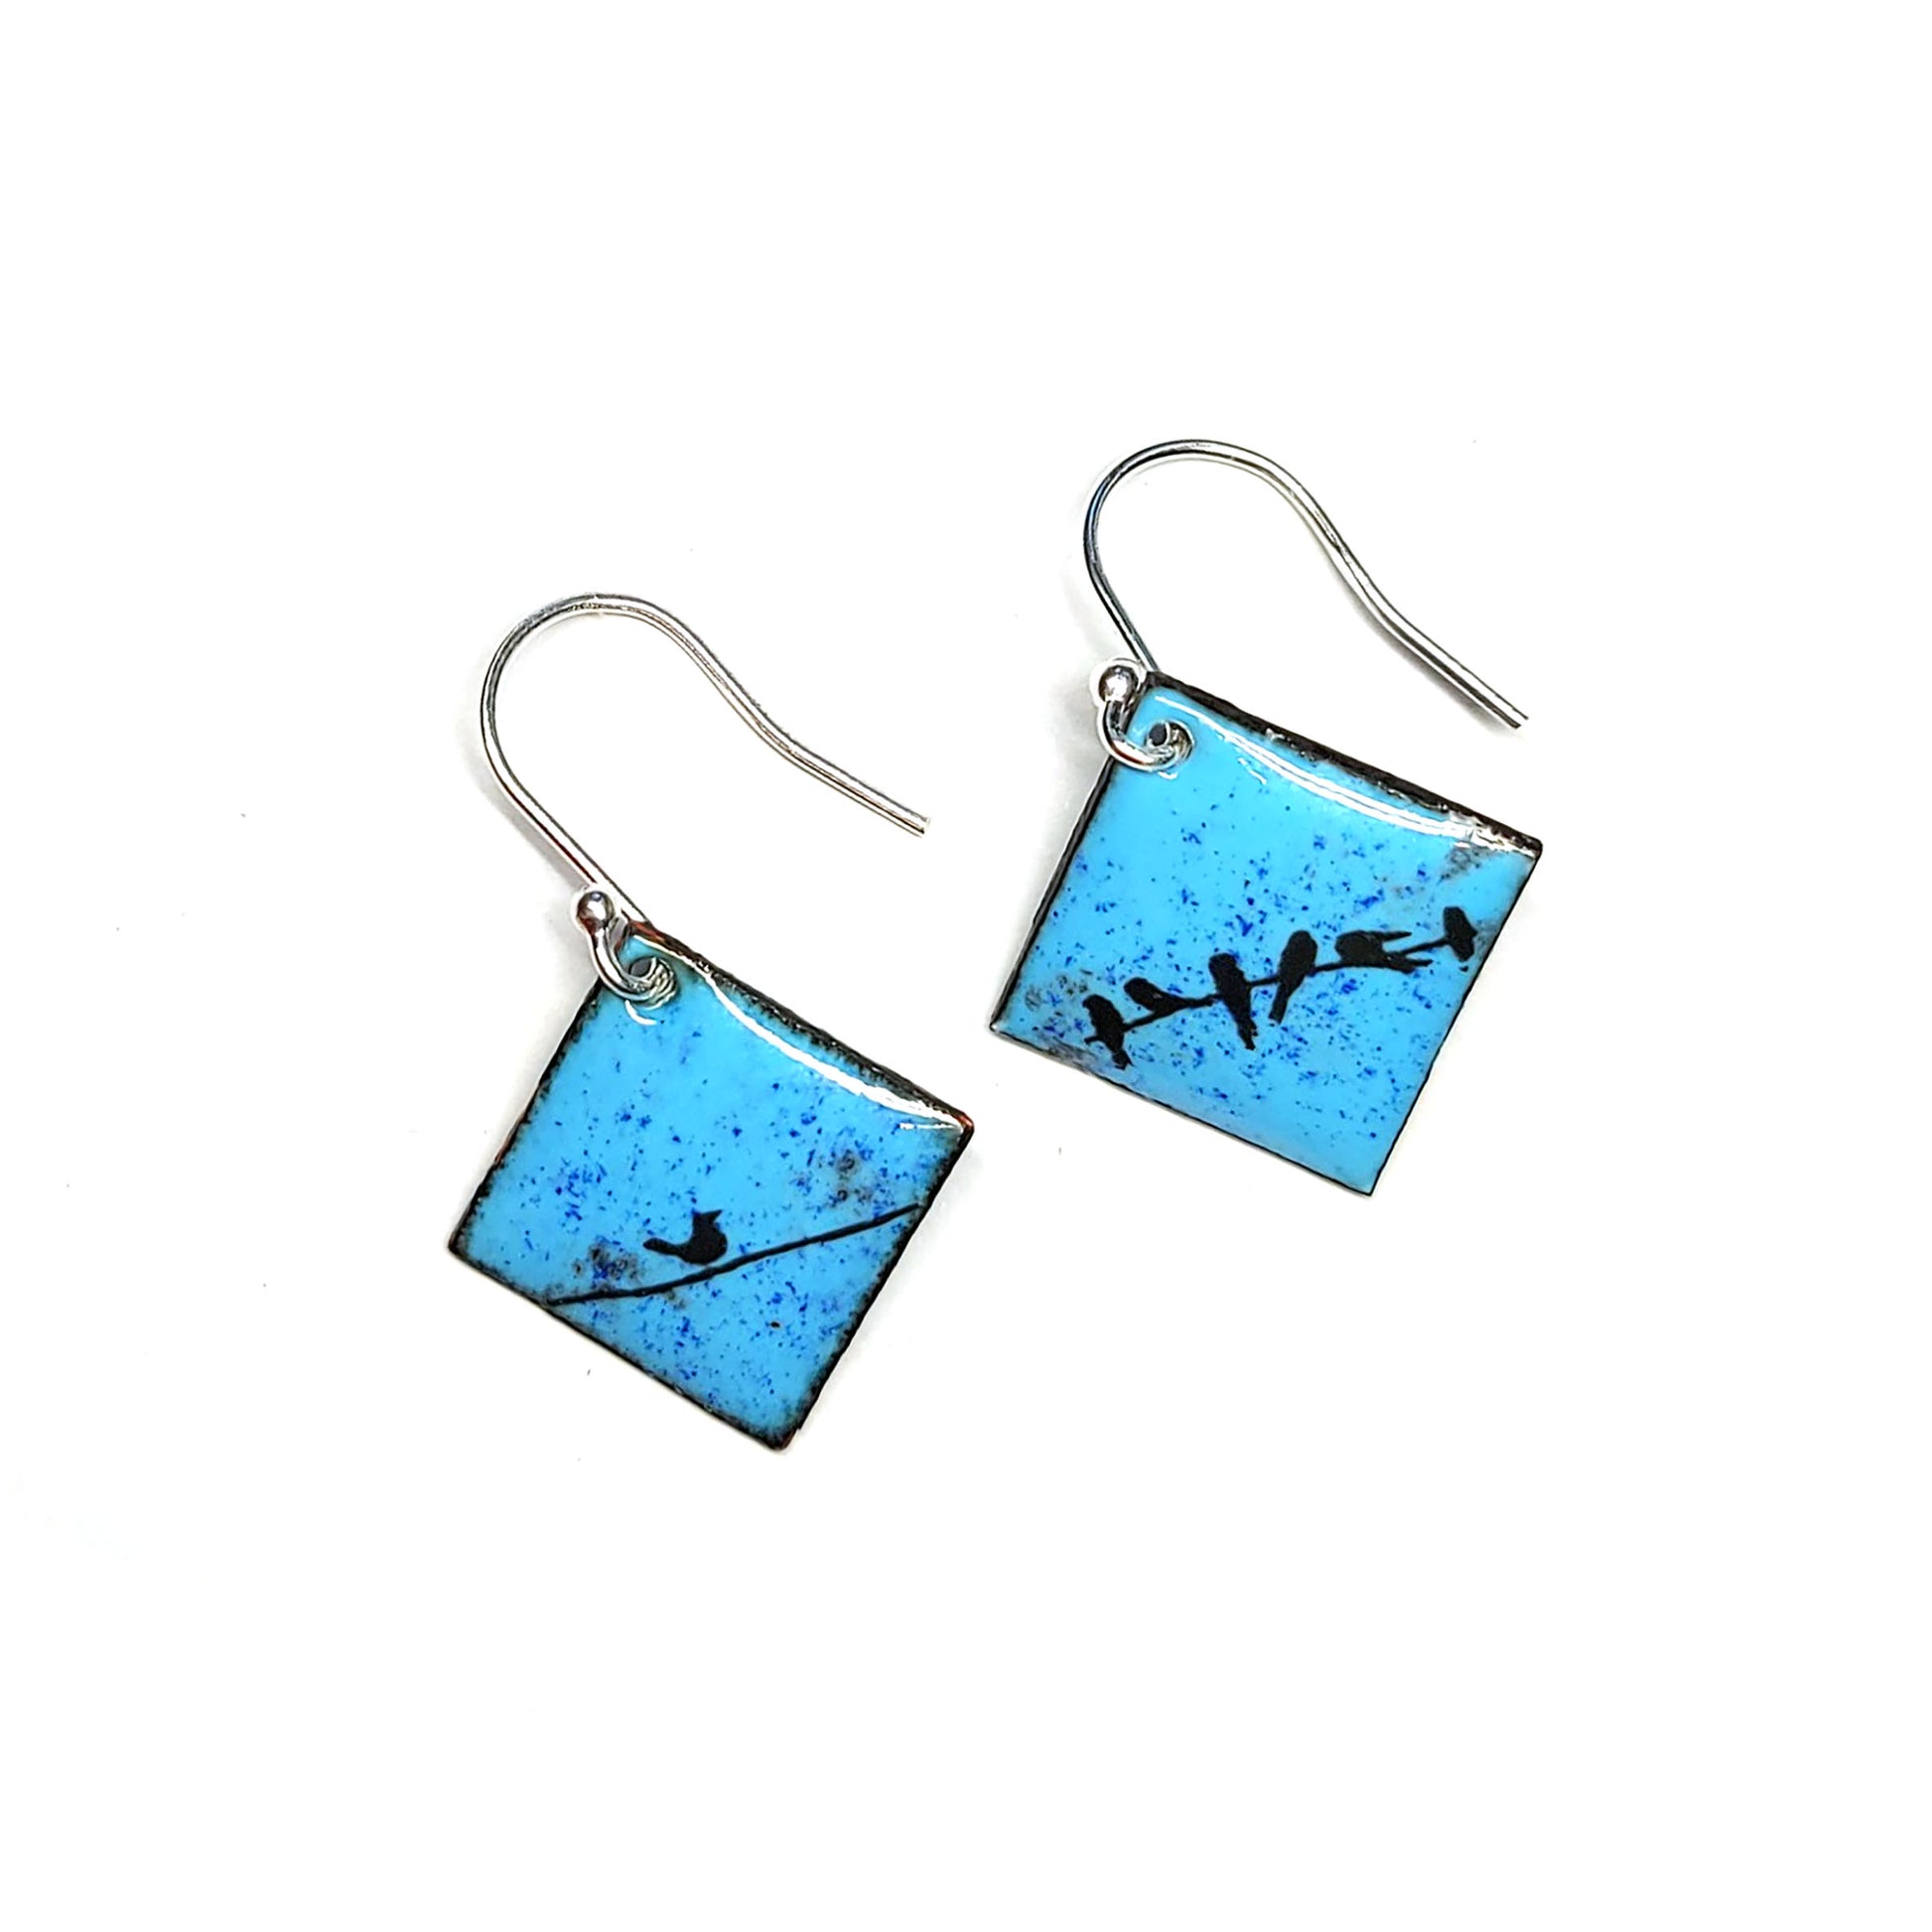 Square drop earrings featuring silhouettes of birds sitting on a wire against a blue enamel background.